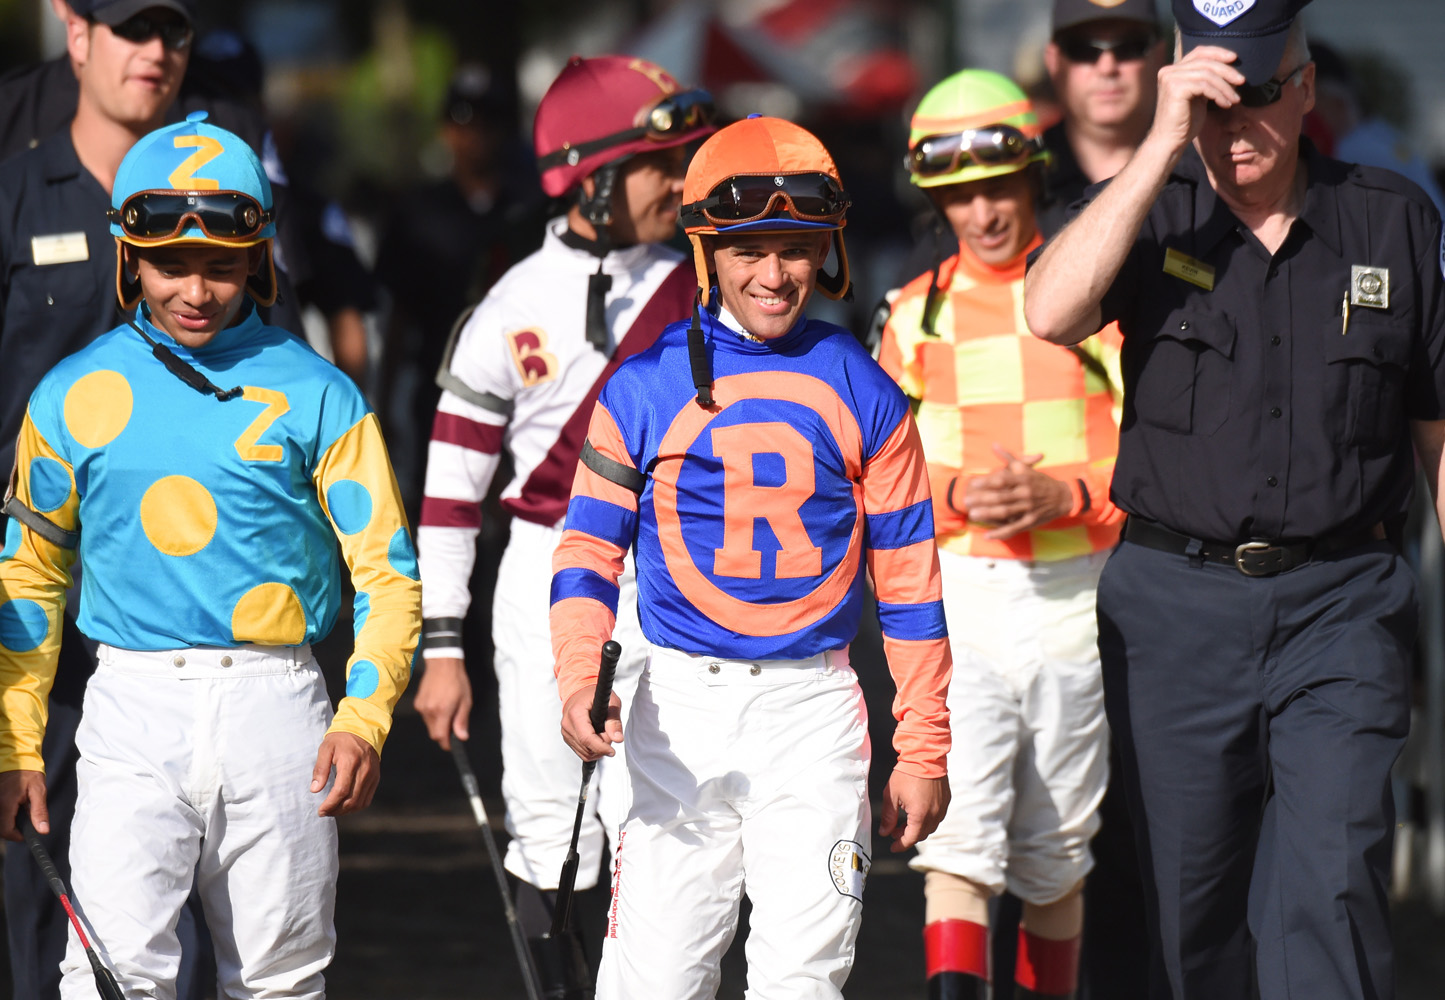 Javier Castellano entering the Saratoga paddock with the rest of the jockey colony in 2019 (Bob Mayberger)